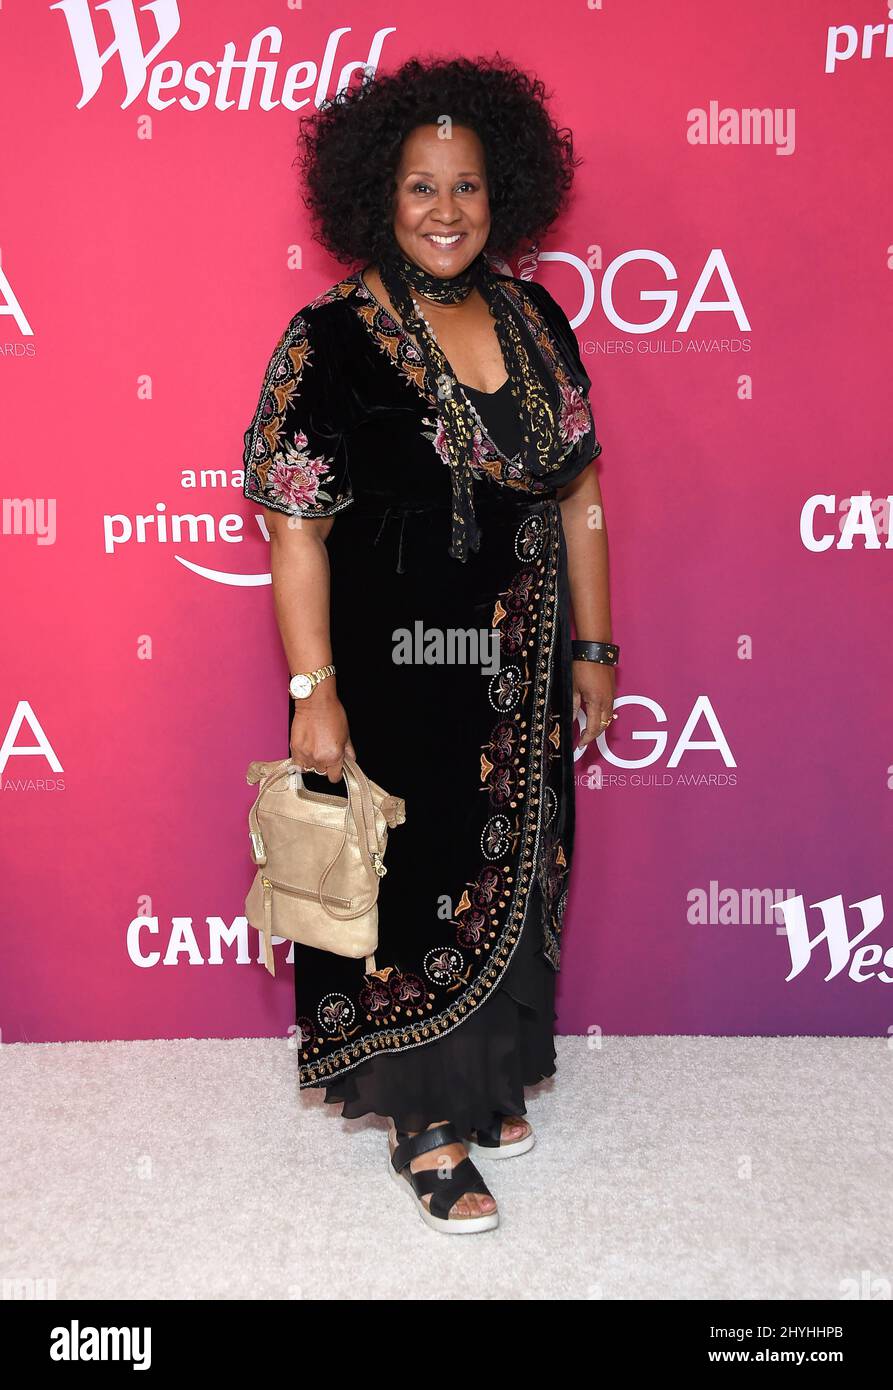 Sharen Davis at the 21st CDGA (Costume Designers Guild Awards) held at the Beverly Hilton Hotel on February 19, 2019 in Beverly Hills. Stock Photo